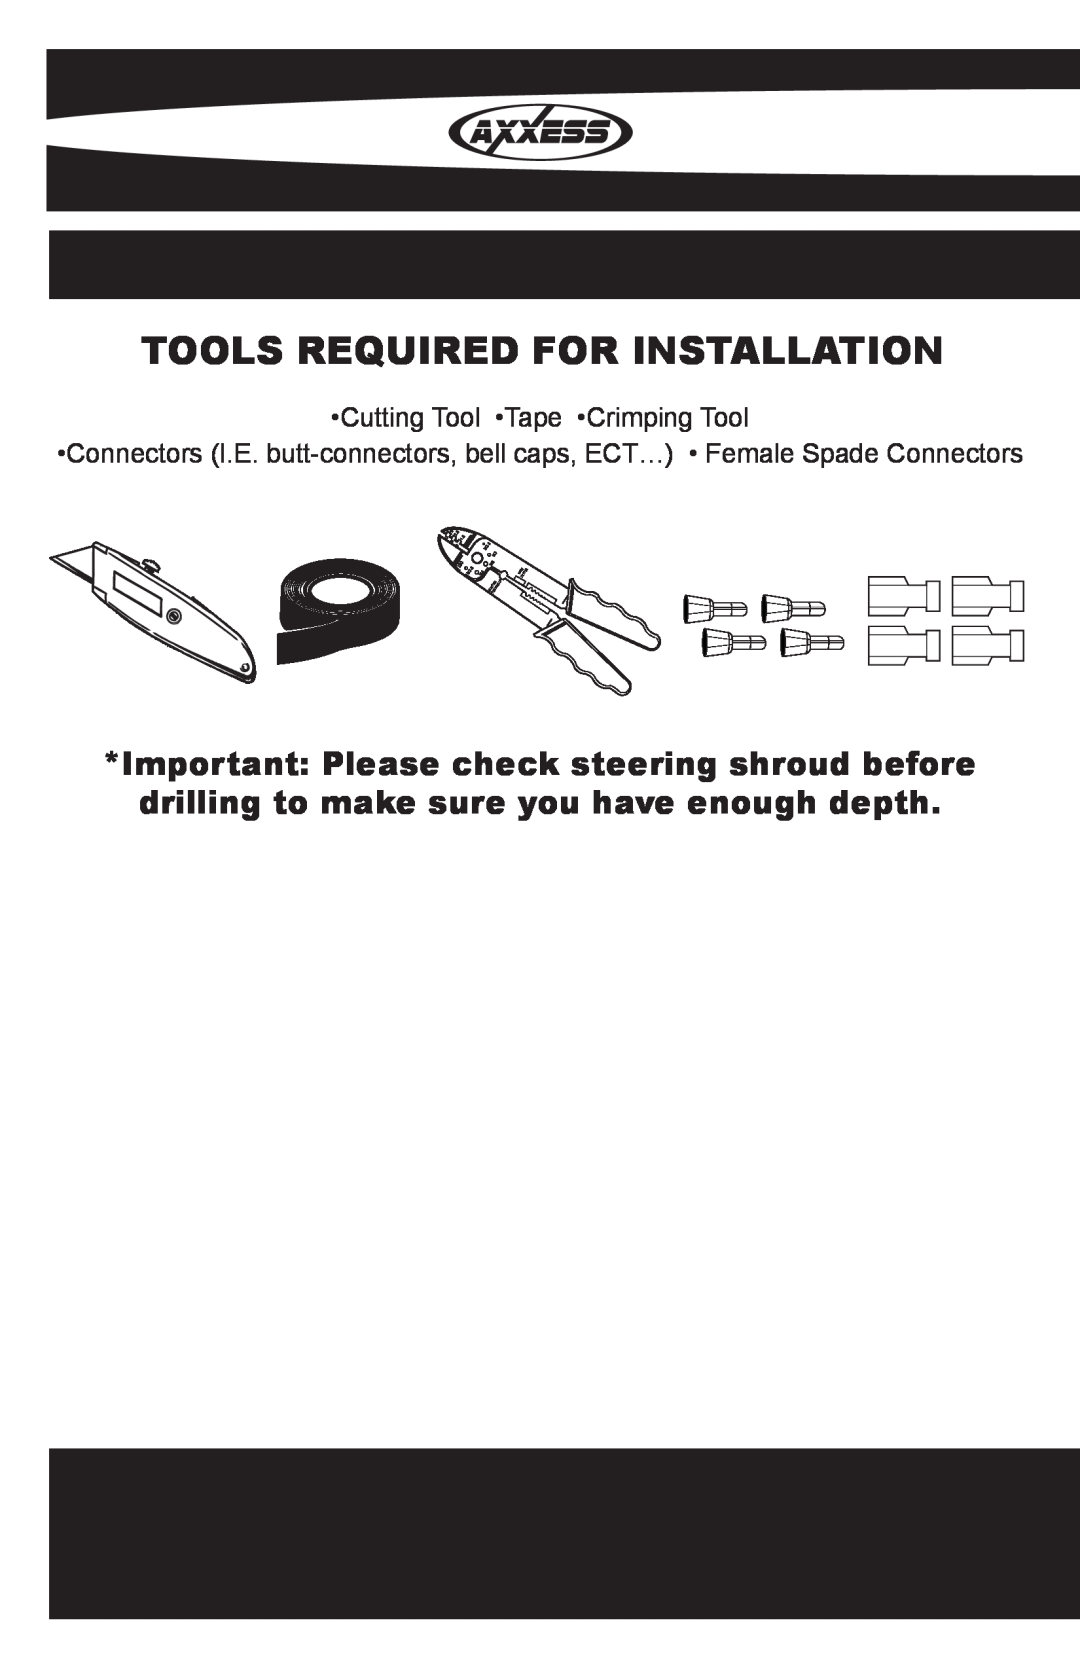 Metra Electronics OESWC-6502-STK Tools Required For Installation, Cutting Tool Tape Crimping Tool, M M M5 